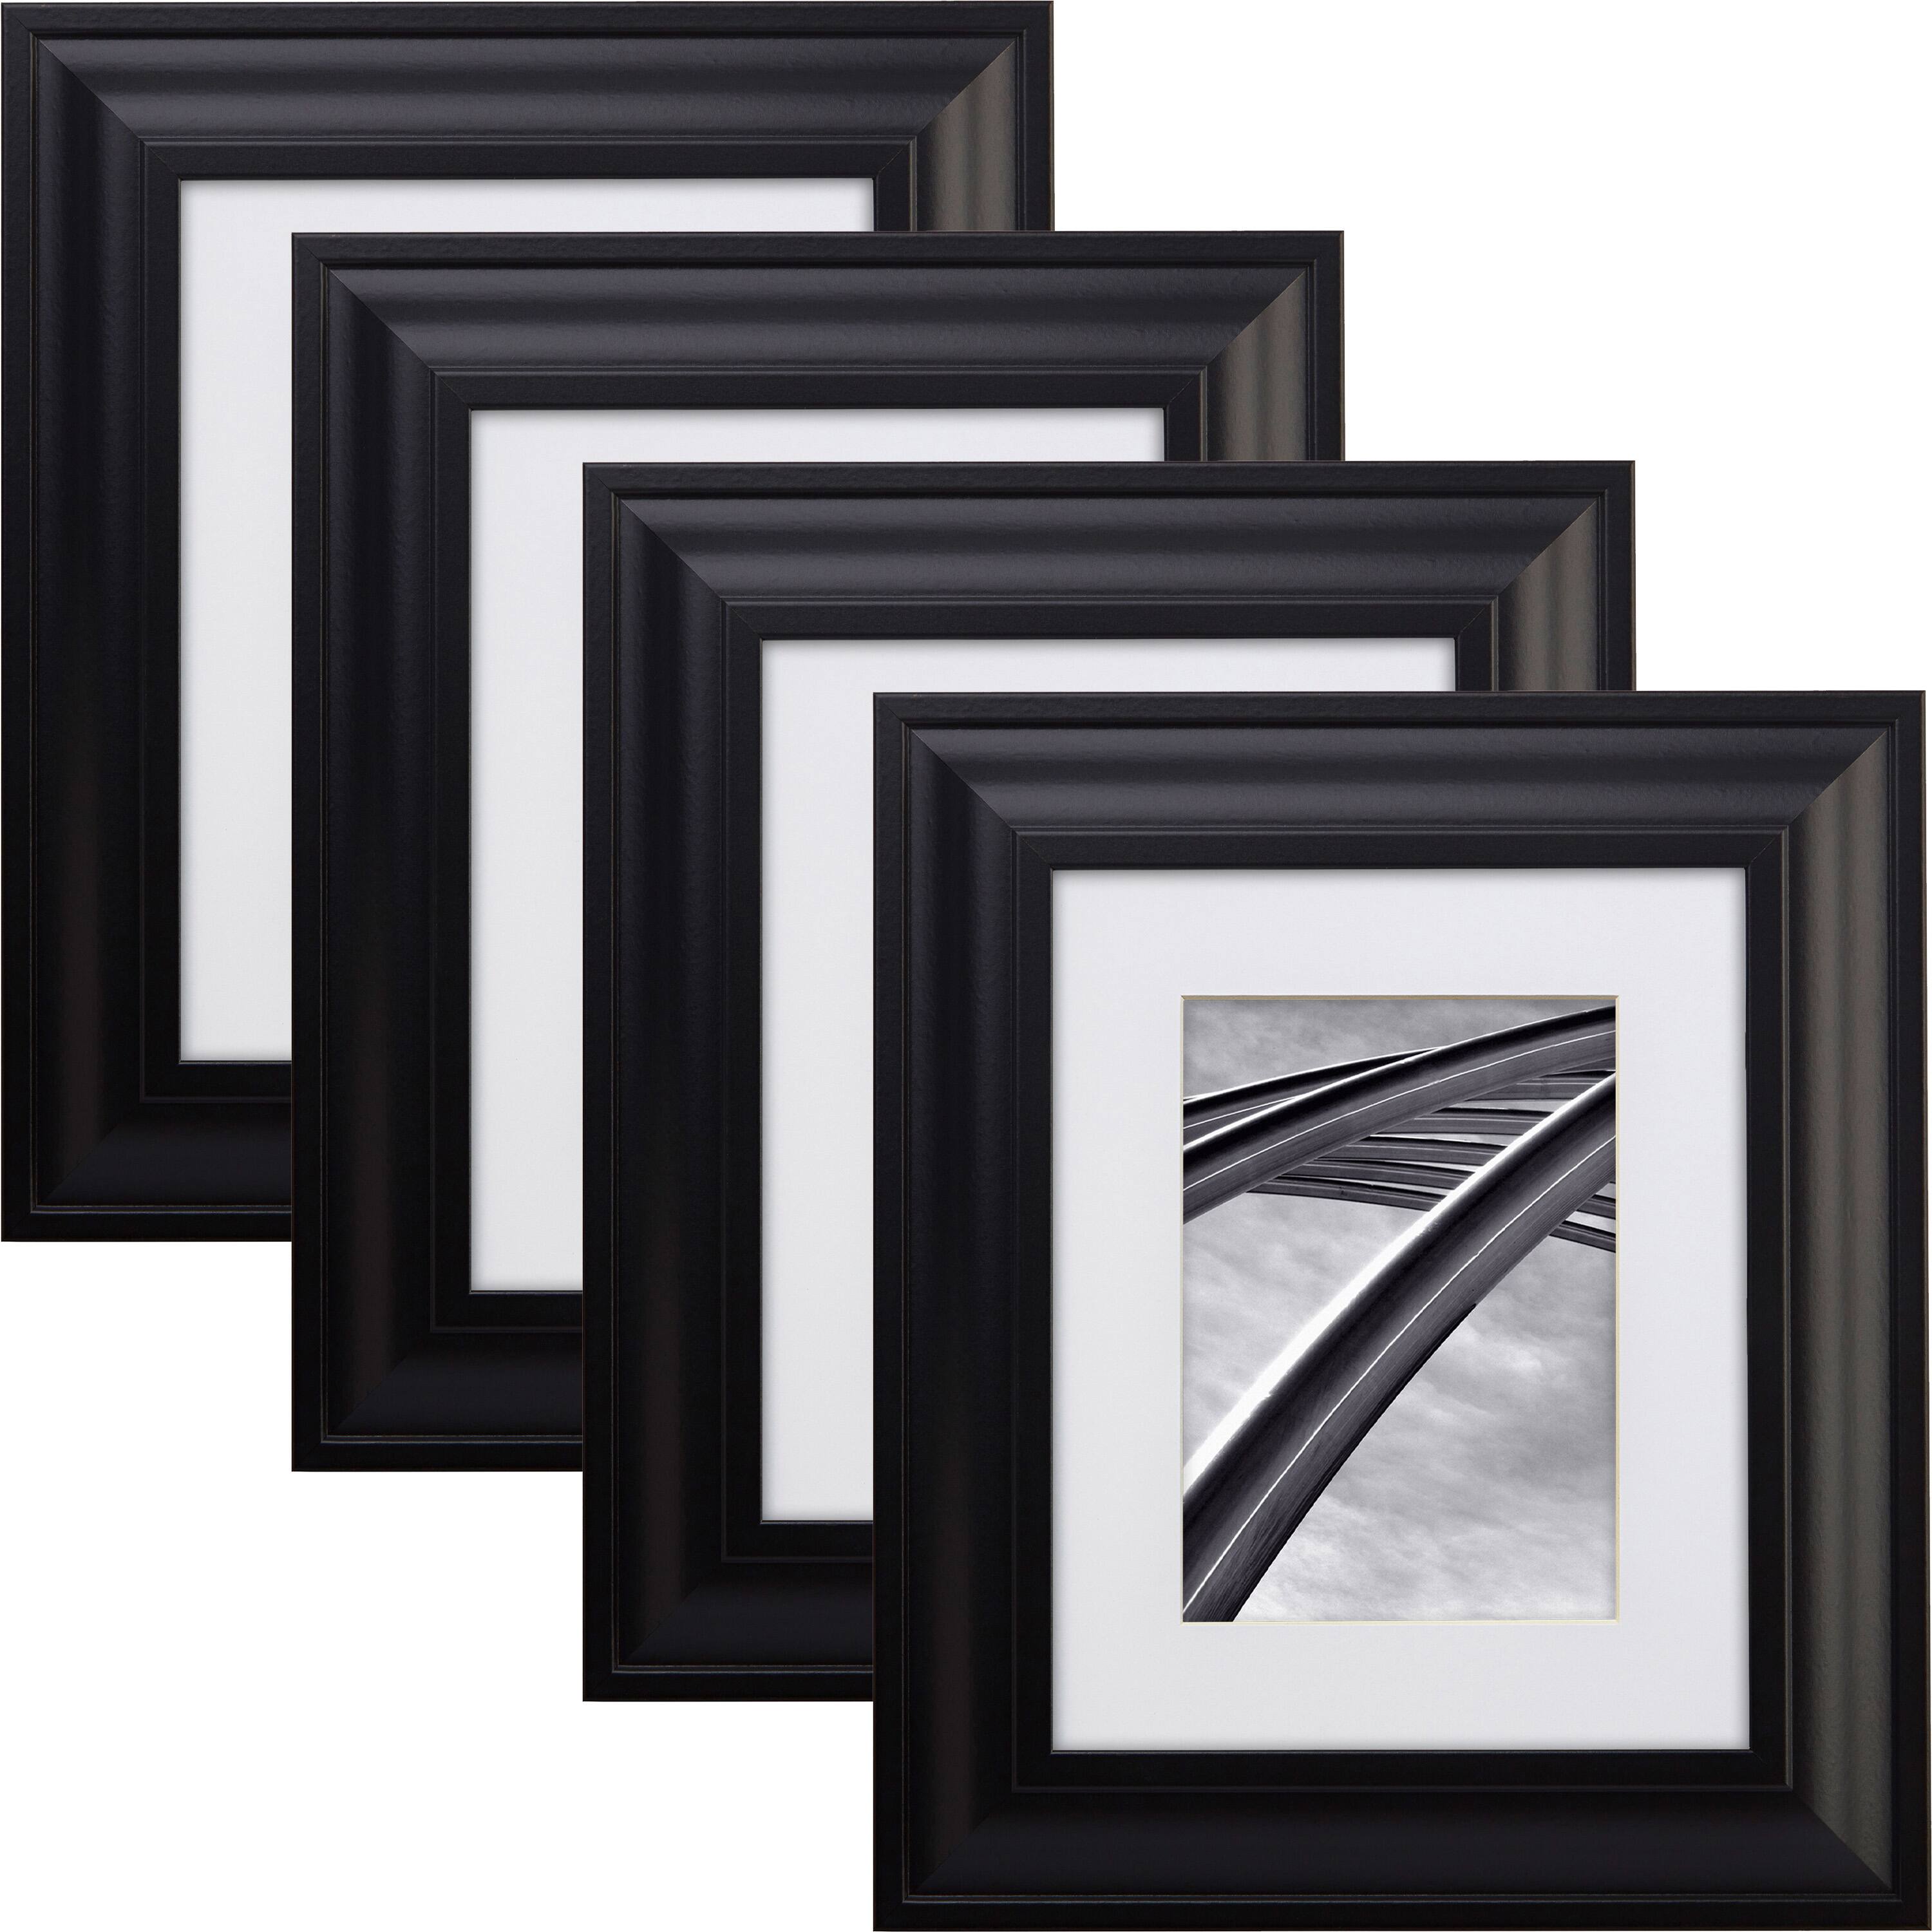 Craig Frames 4 Pack Upscale Satin Black Picture Frame with Mat